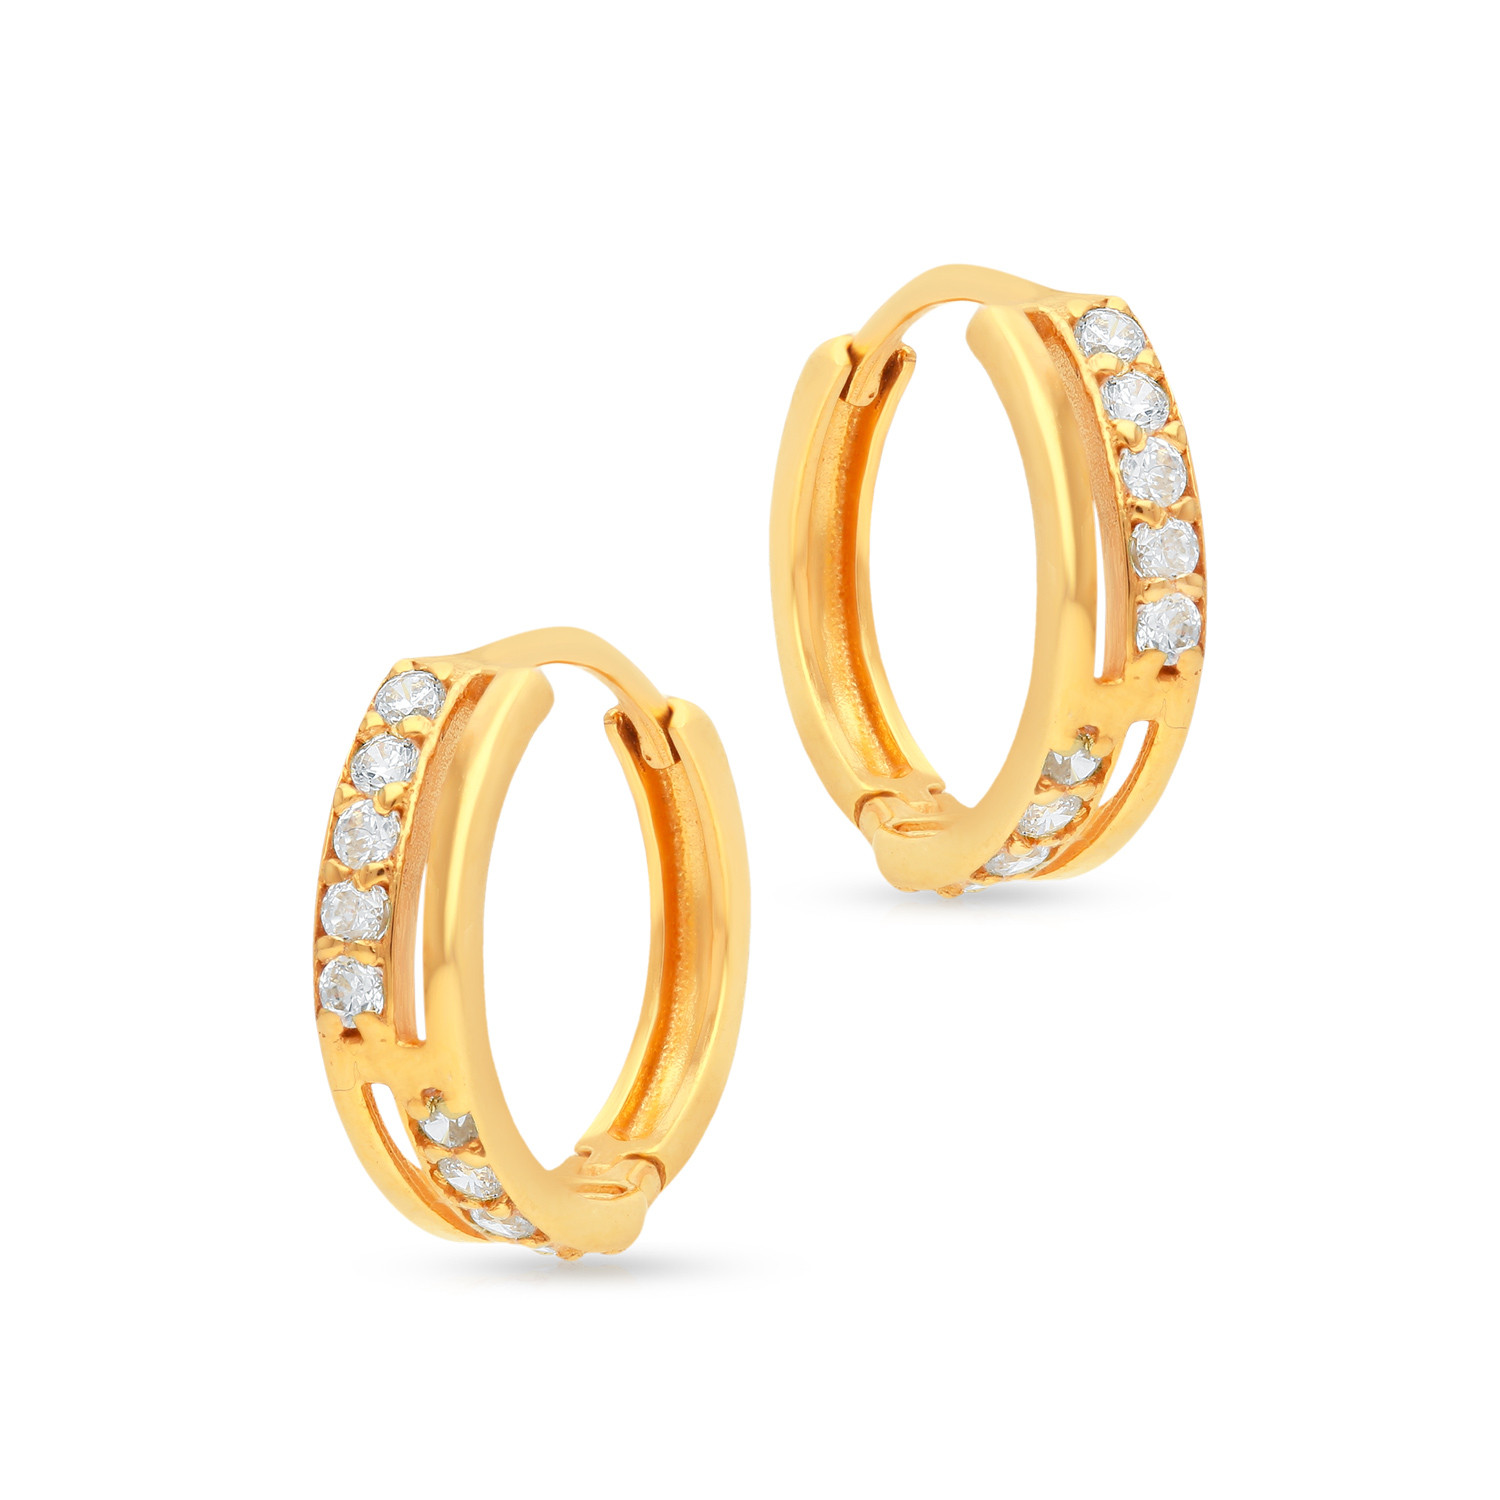 Unique Rose Gold and Diamond Hoop Earrings